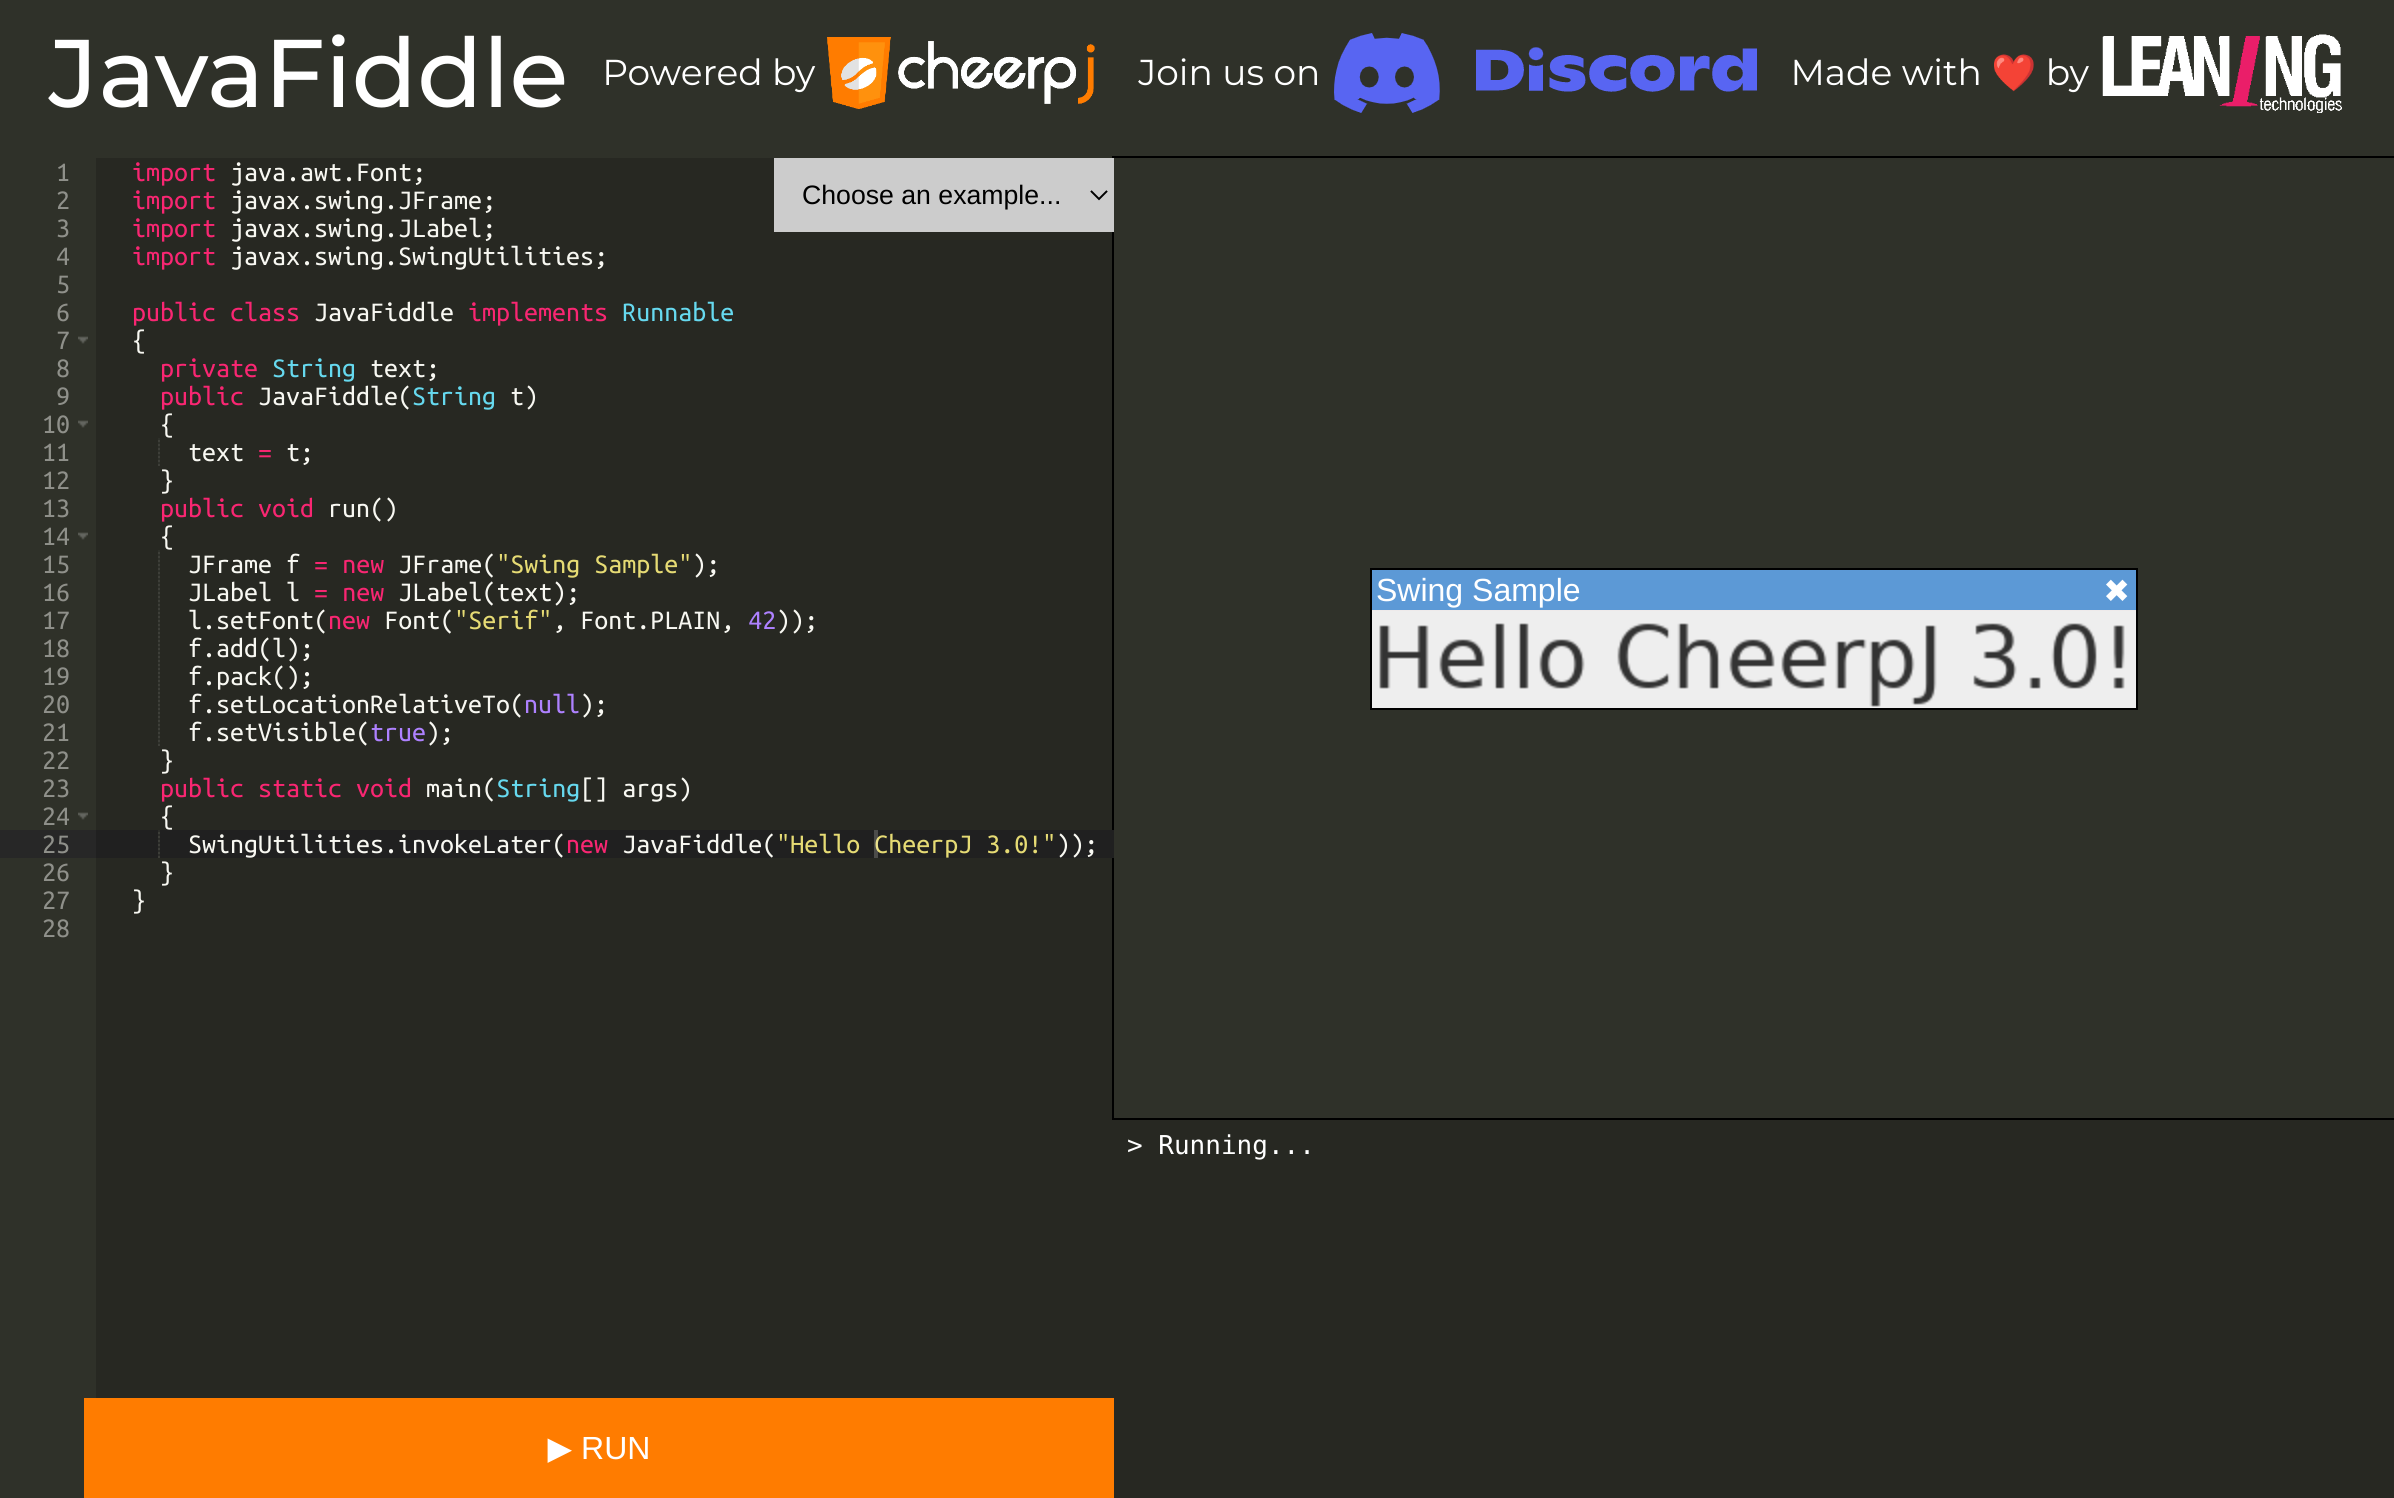 CheerpJ compiling and executing a Swing “Hello World” fully client-side in the browser